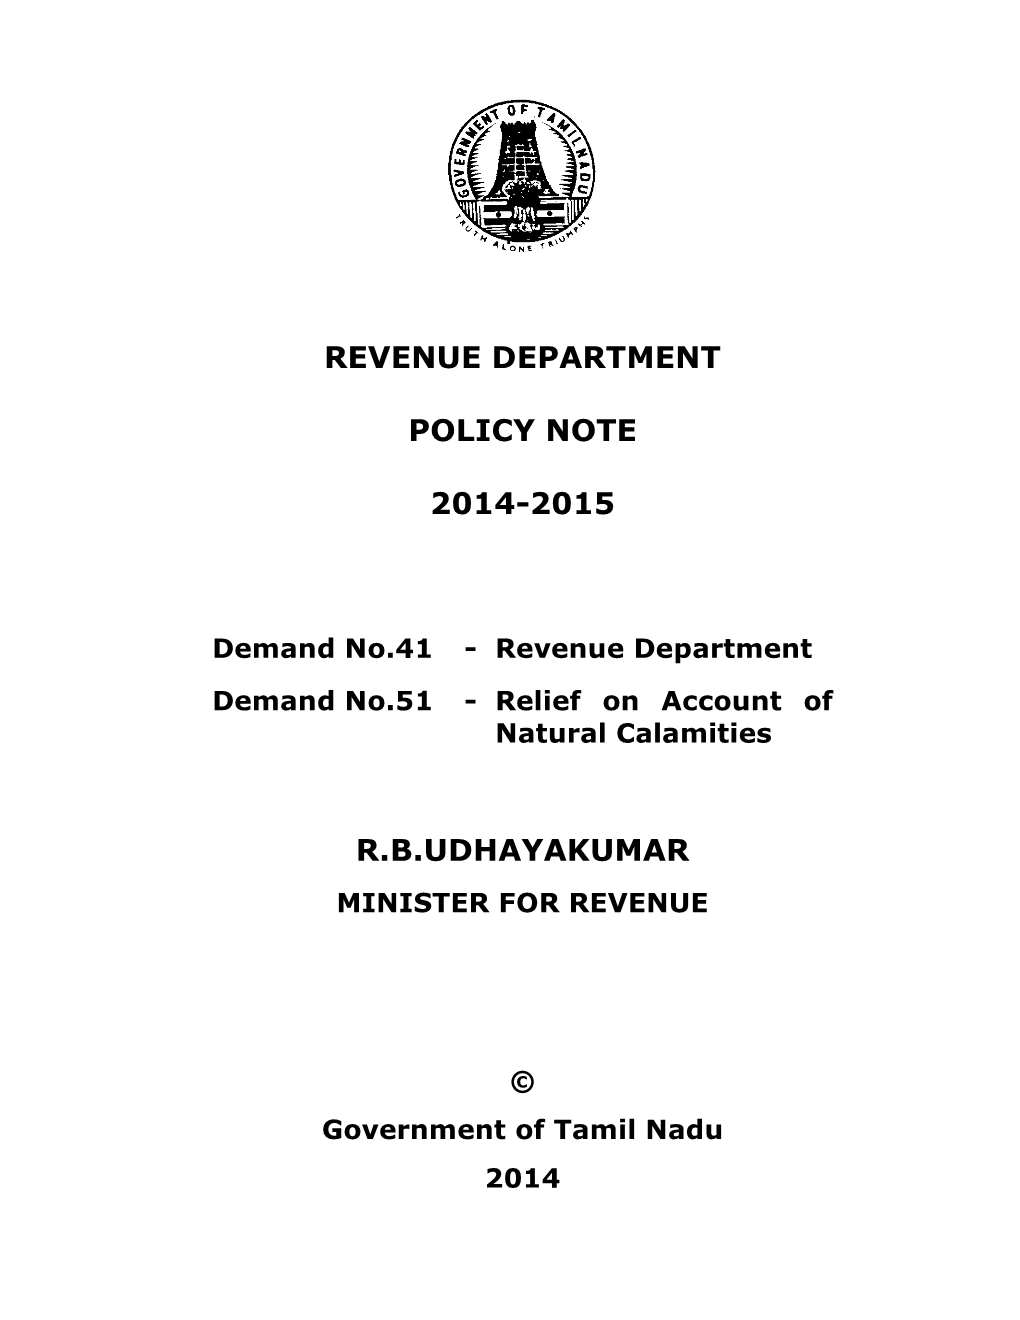 Revenue Department Policy Note 2014-2015